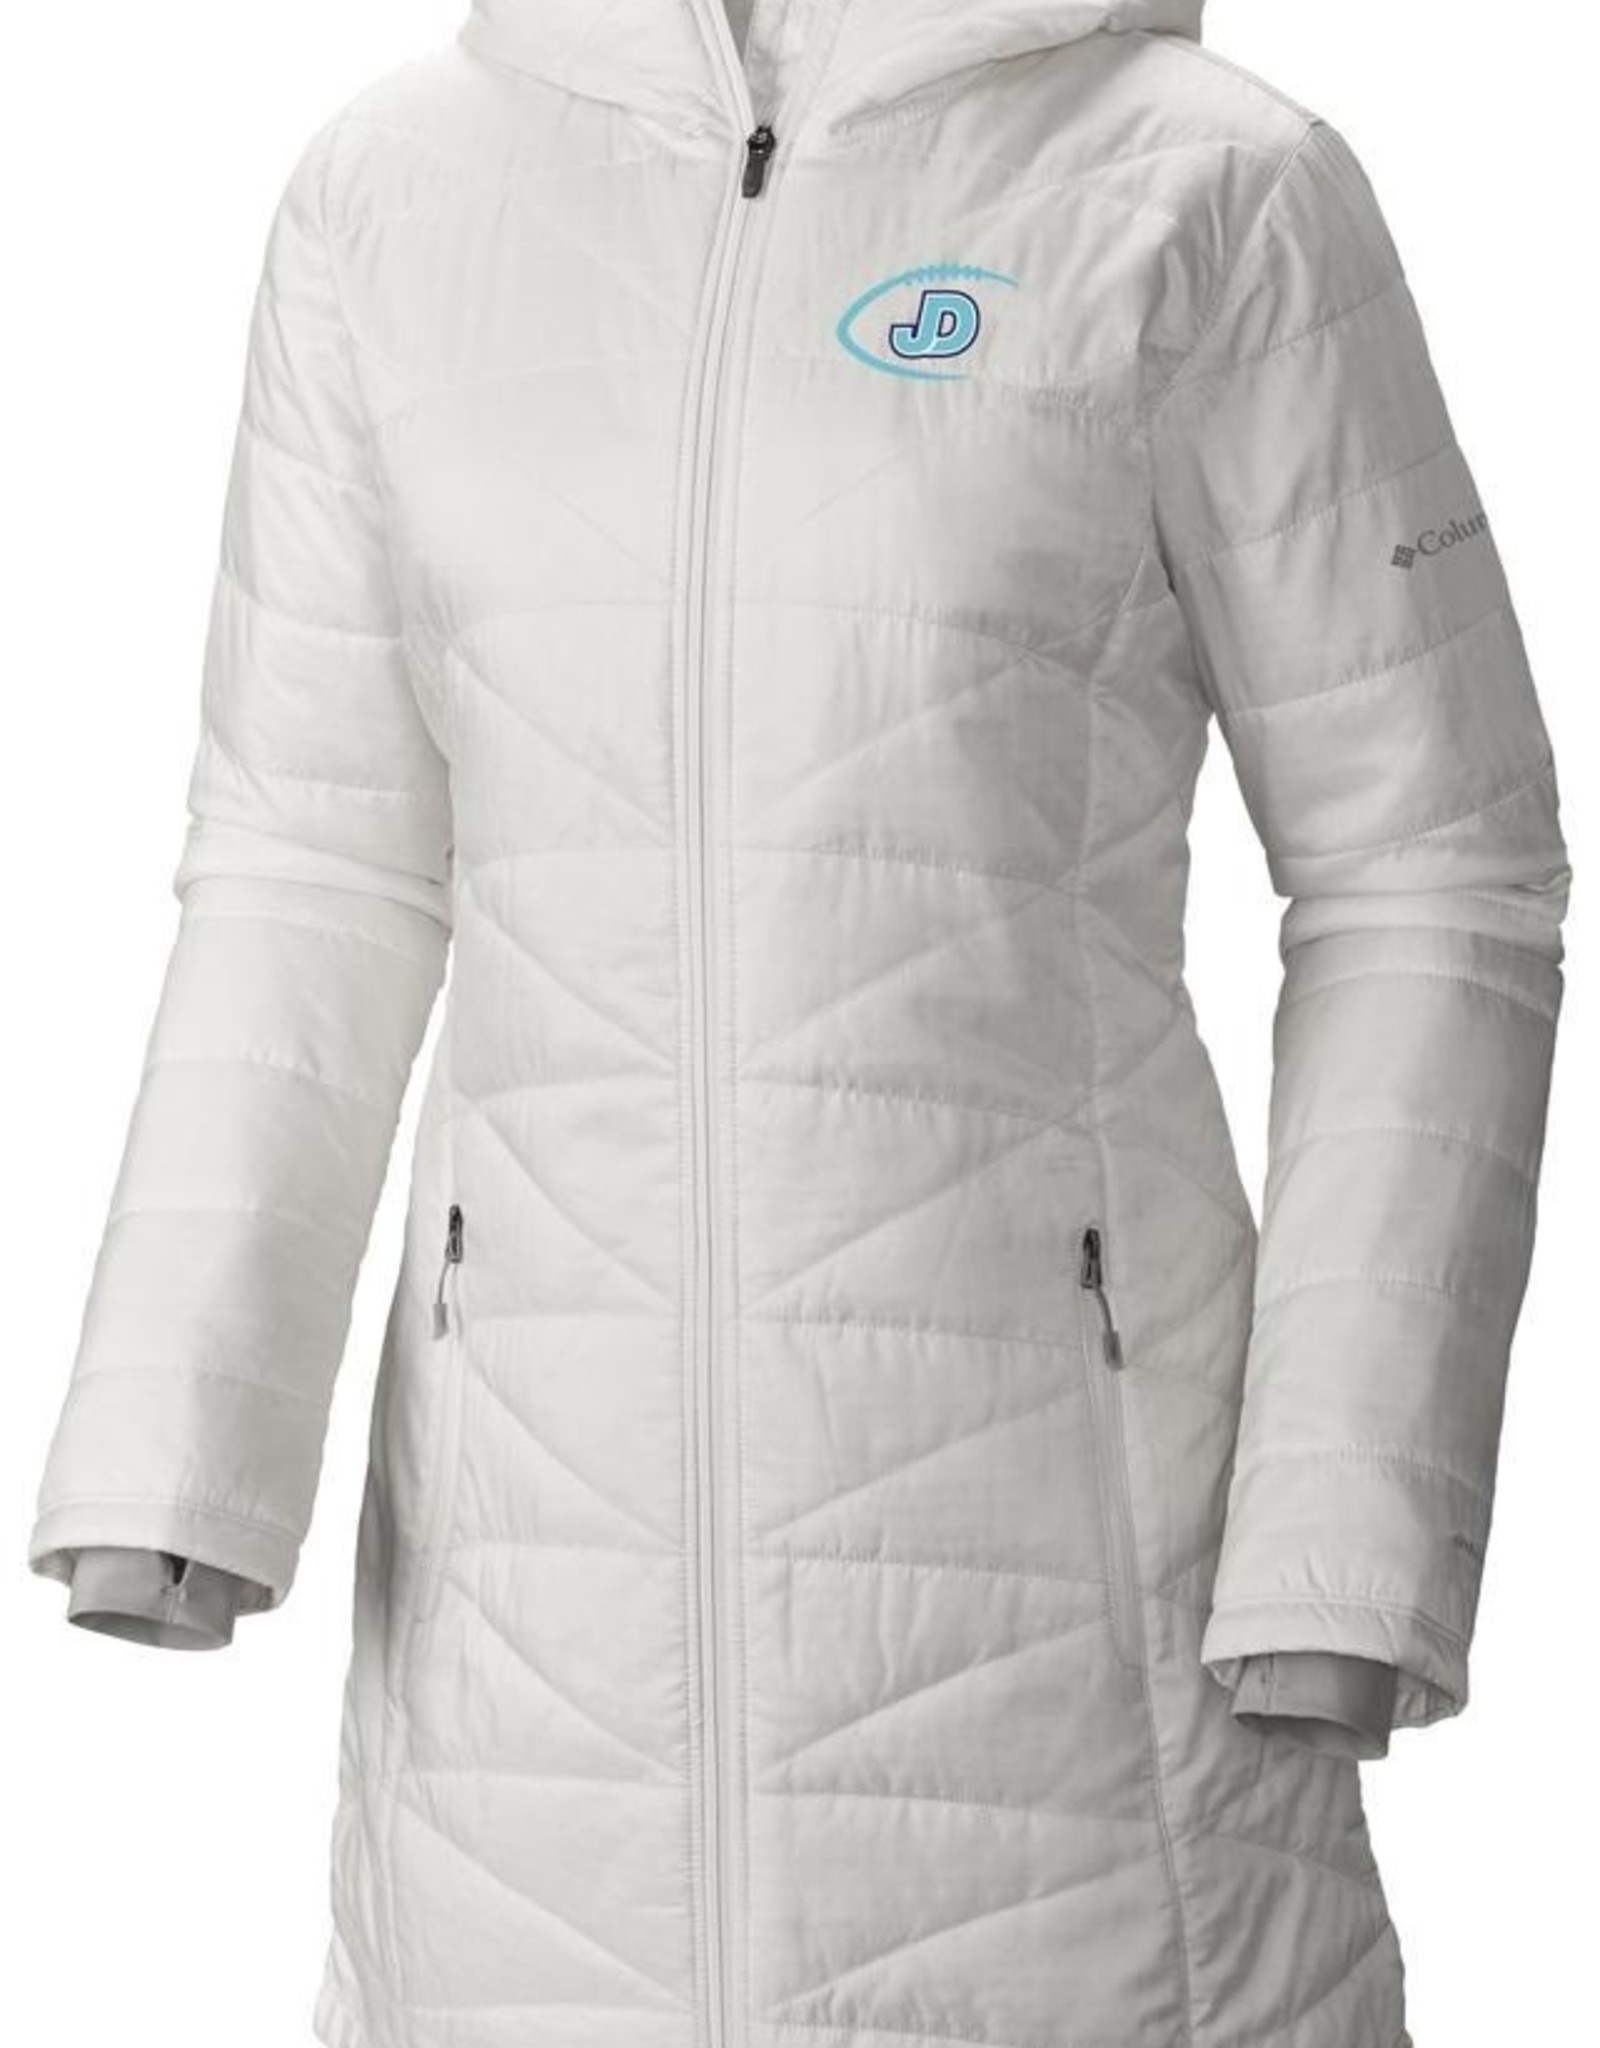 NON-UNIFORM Women’s Columbia embroidered JD Jacket Long